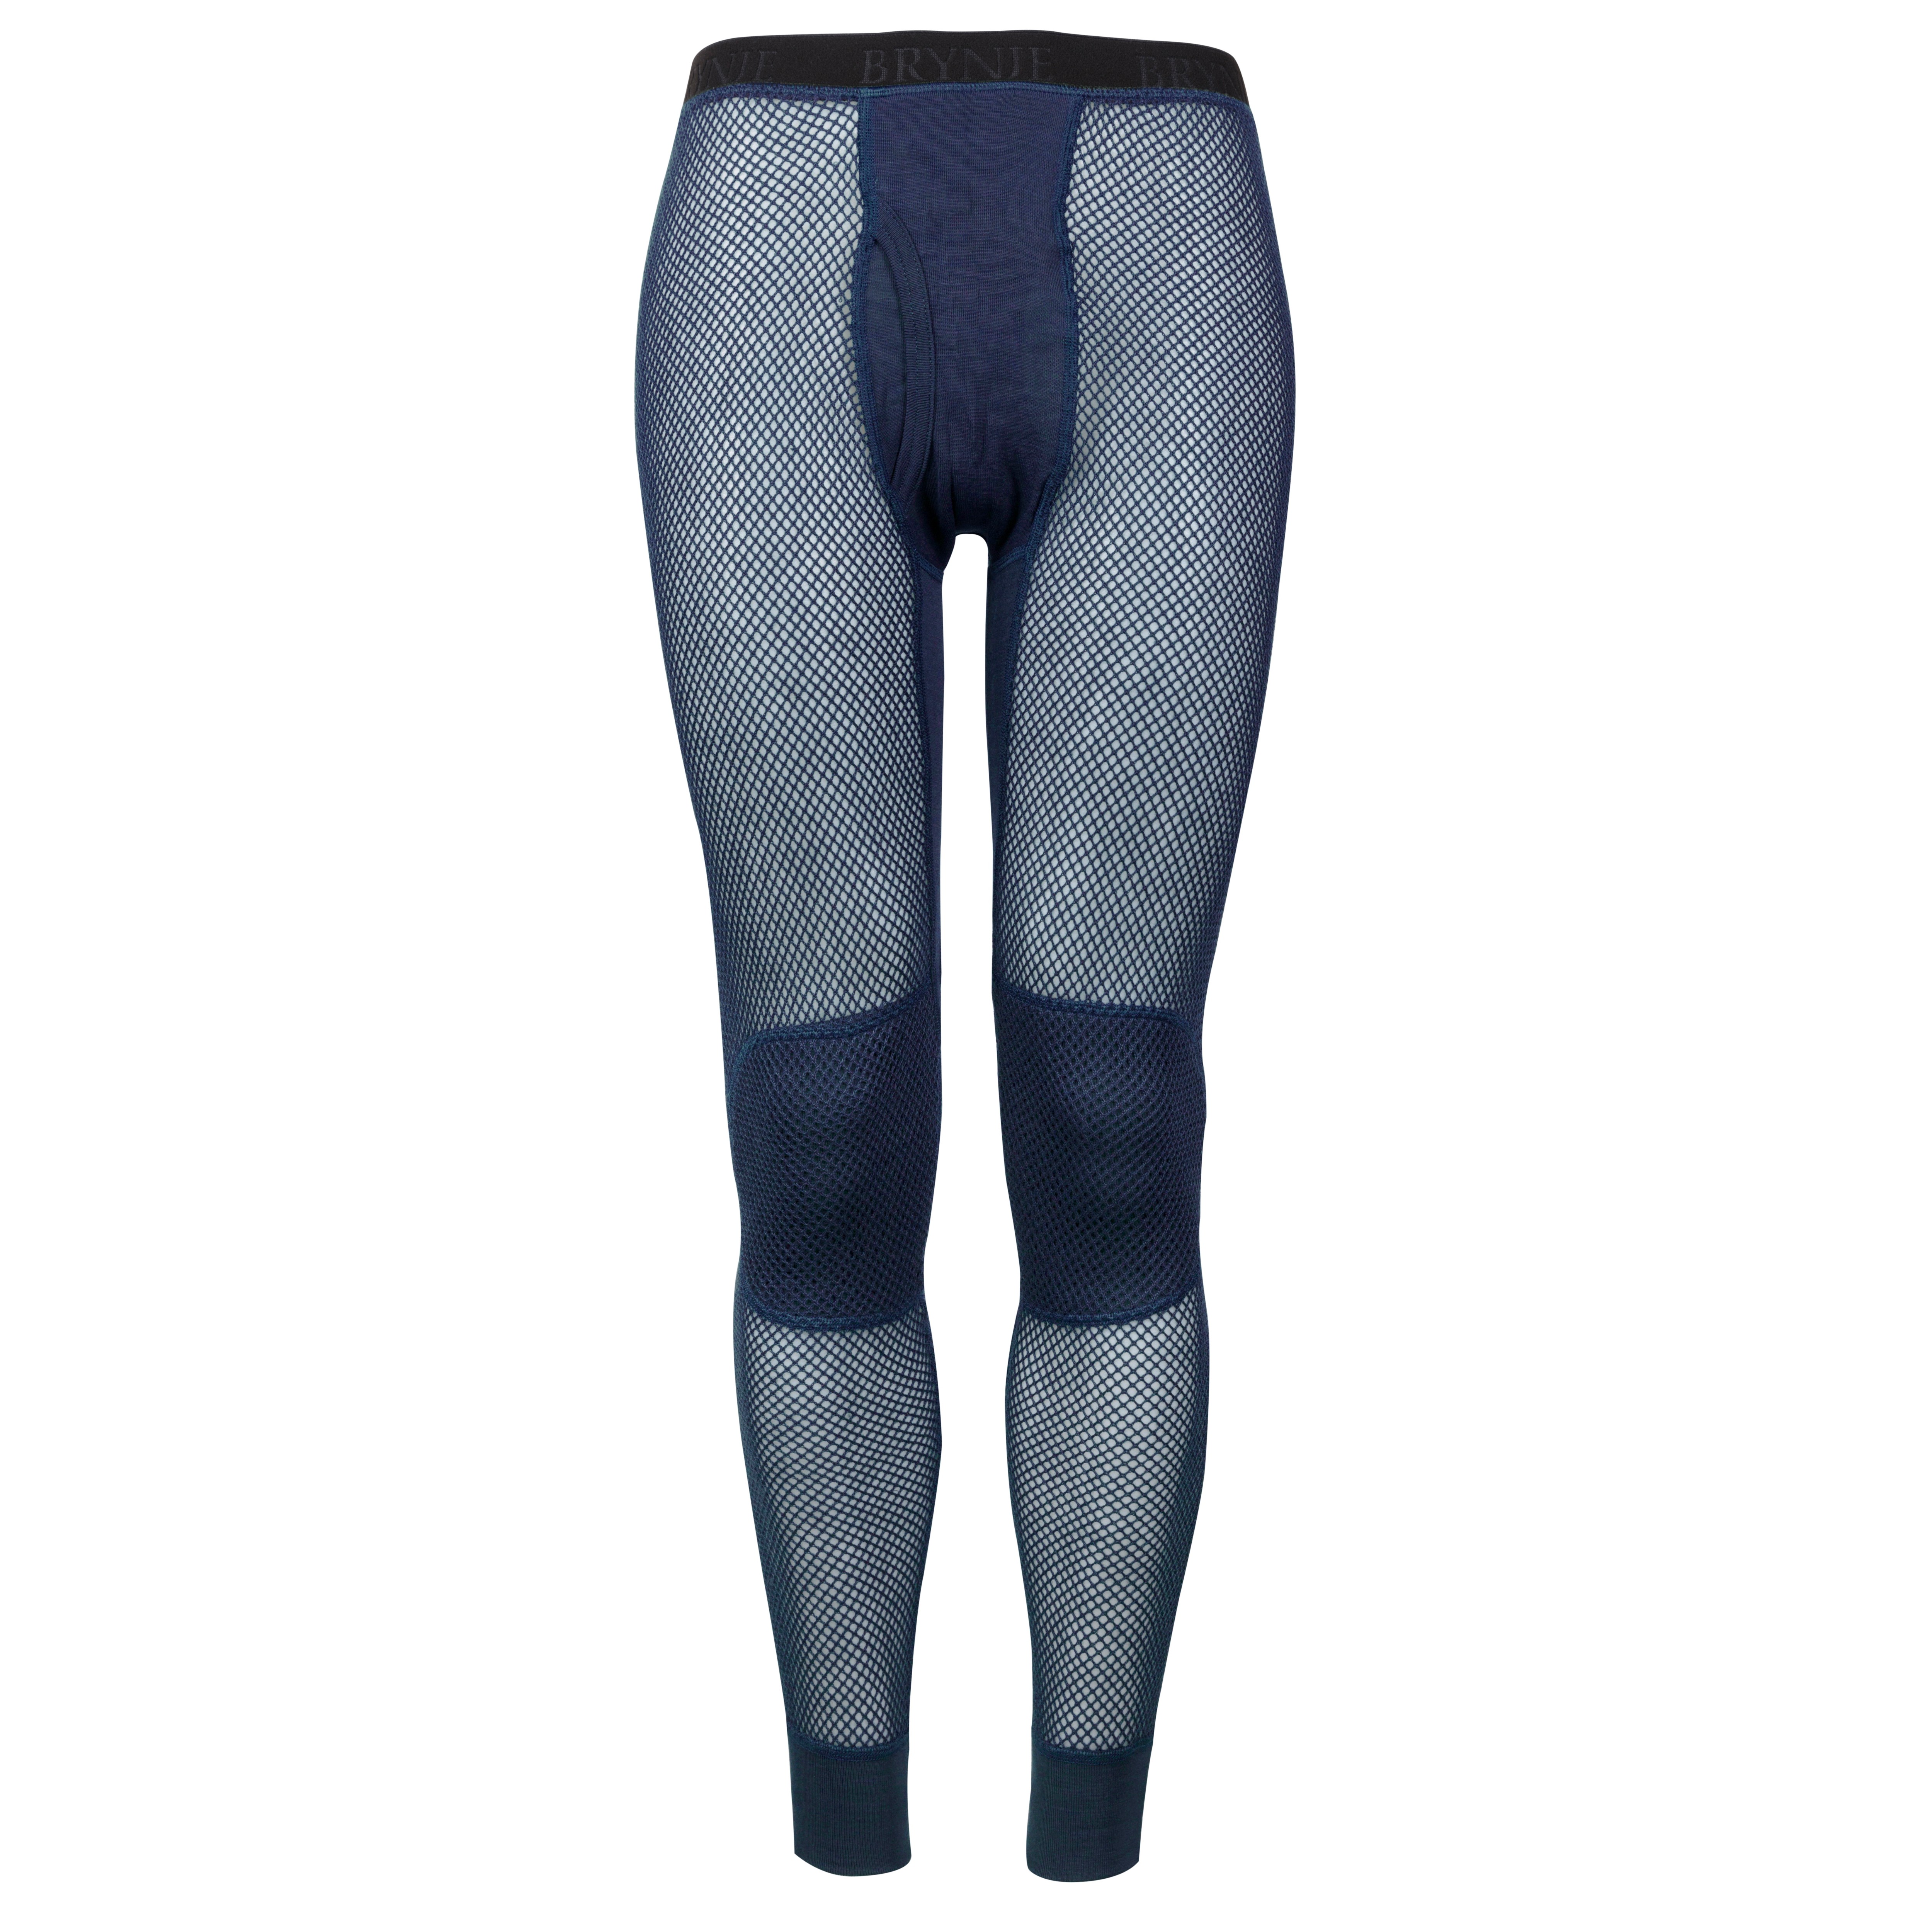 Unisex Super Thermo Longs with Inlay On Knee Navy